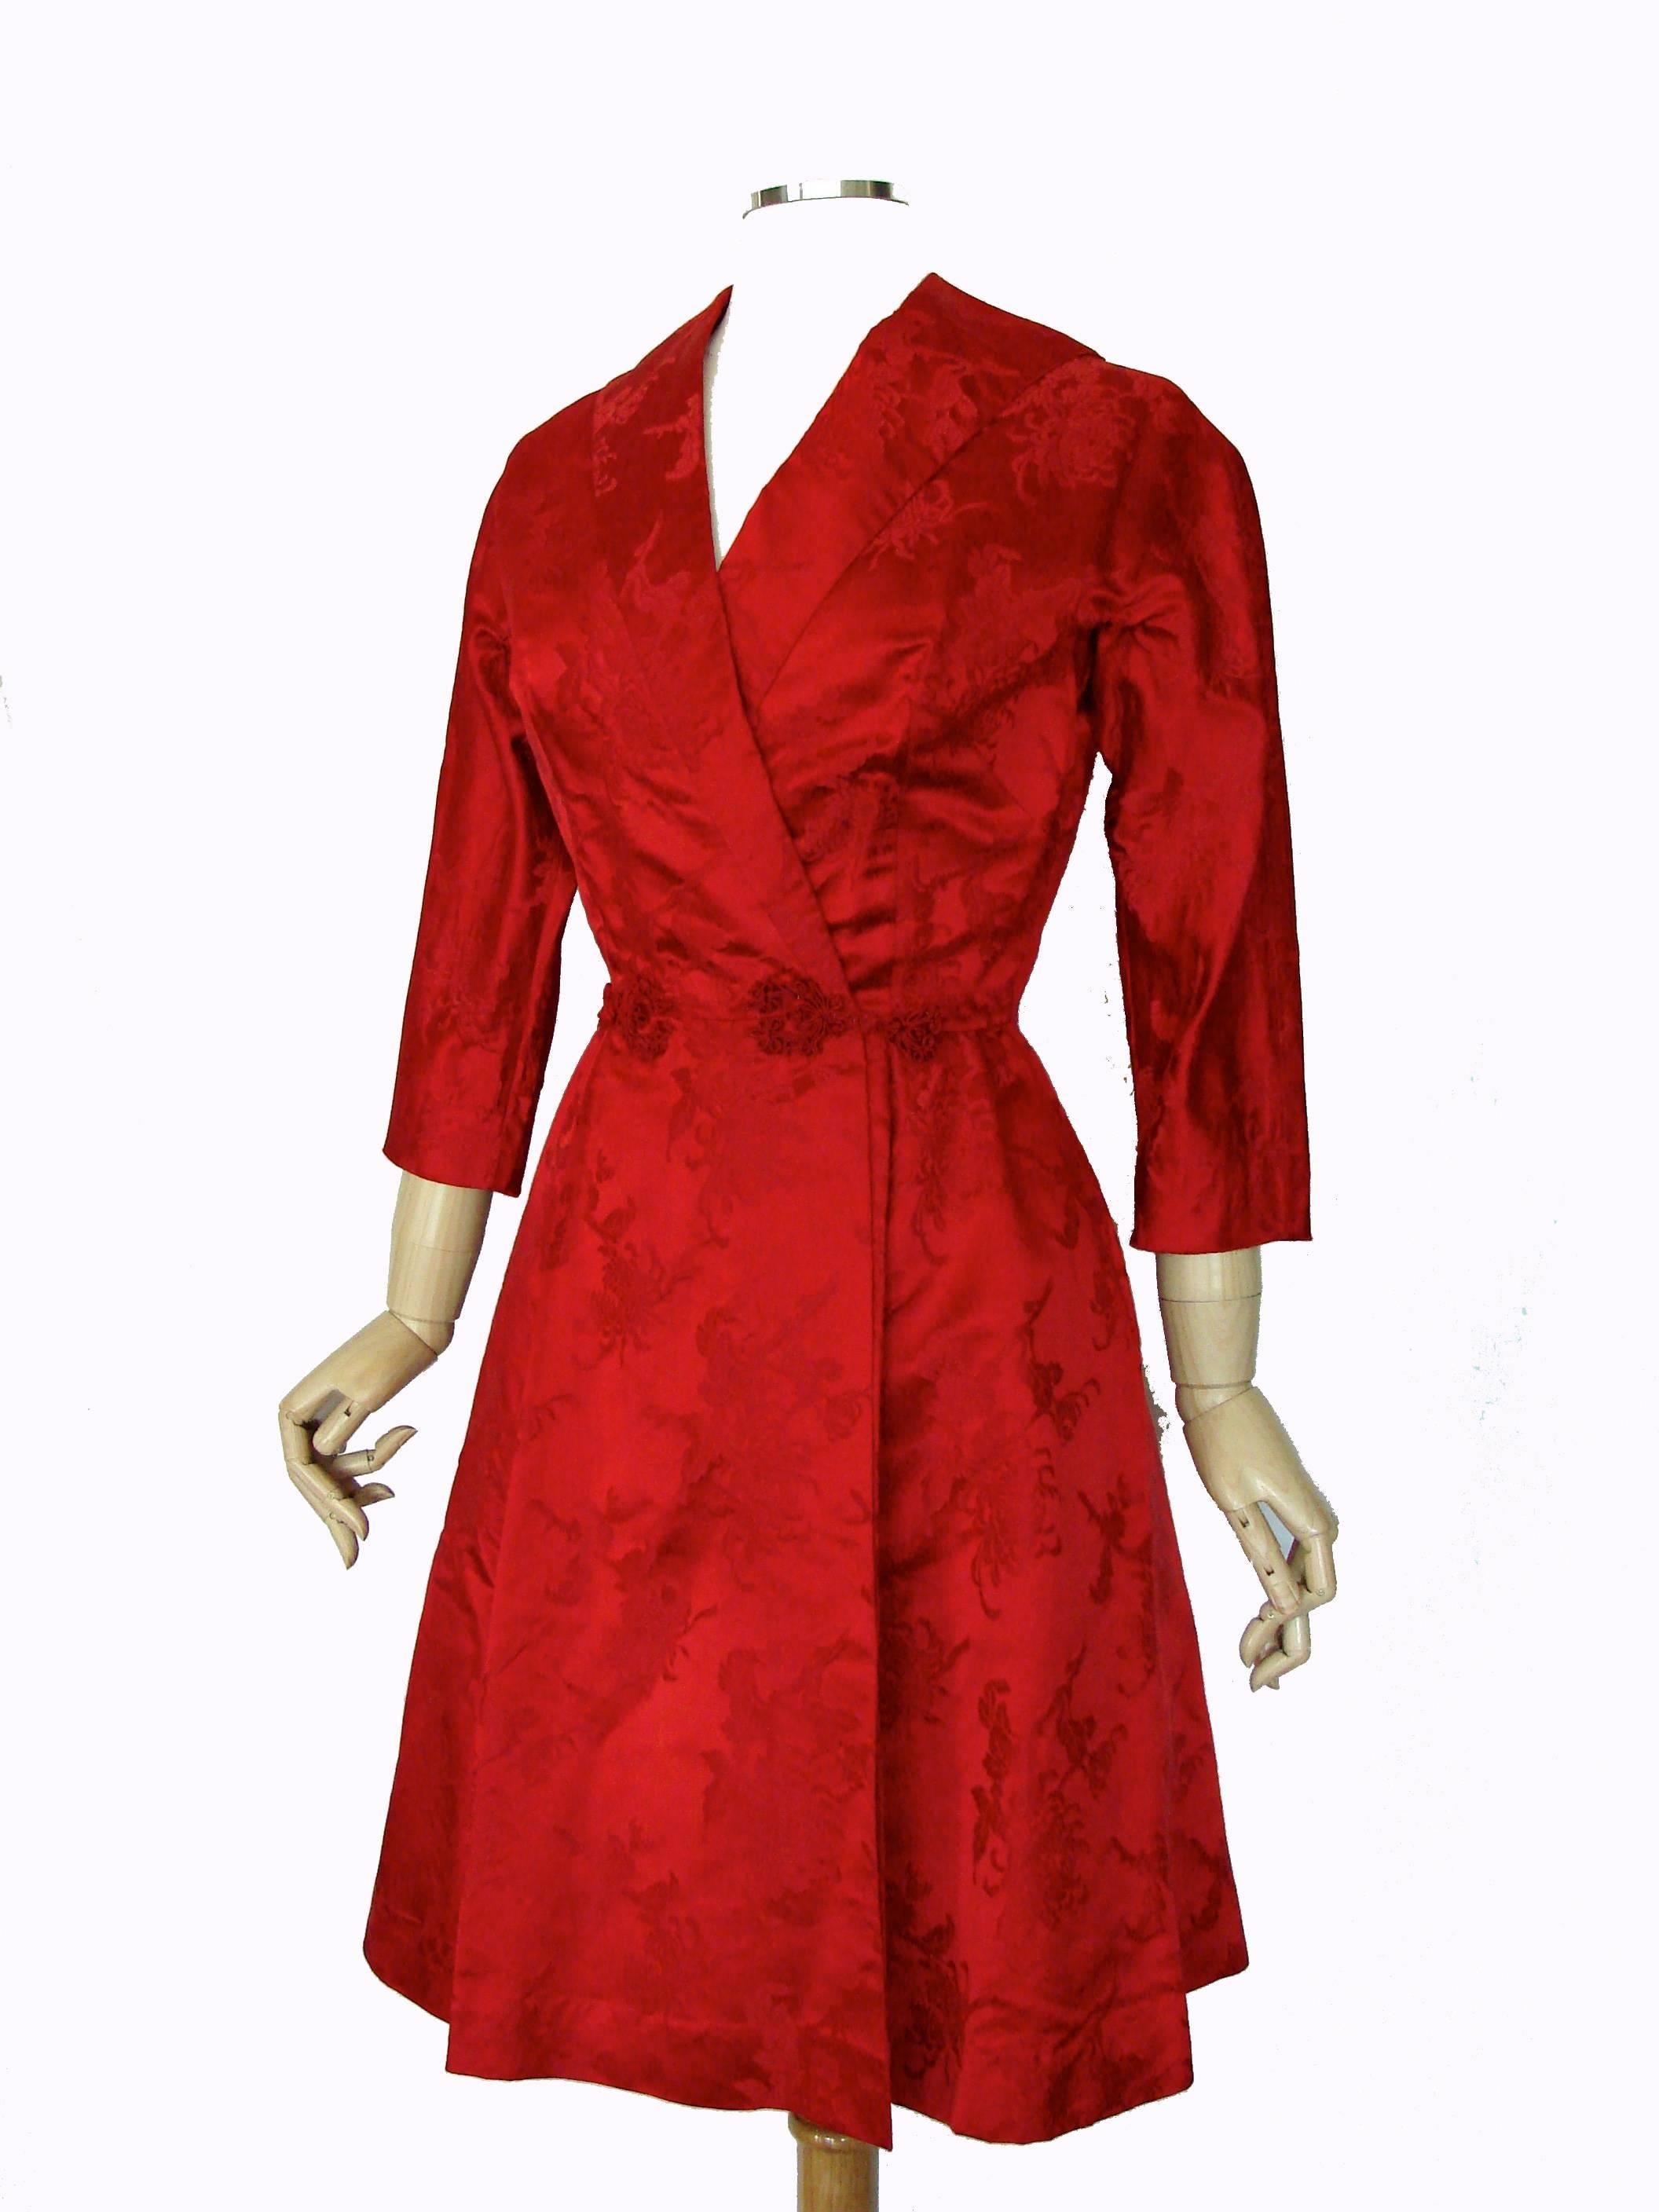 Women's Dynasty for Lord & Taylor Vivid Red Silk Dress with Flared Skirt 1960s Size M